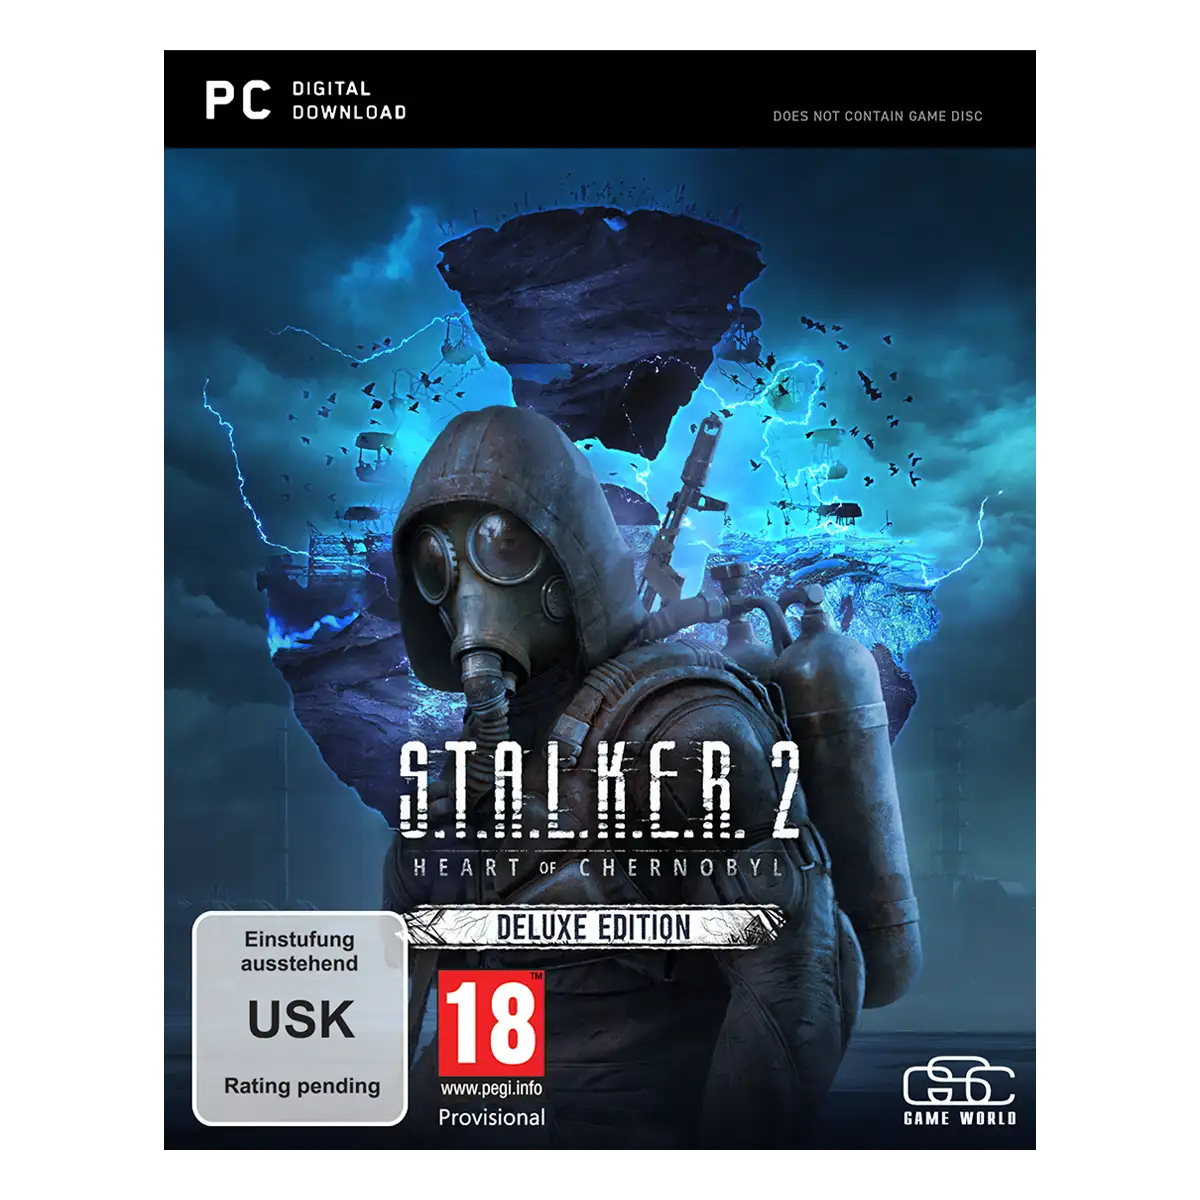 S.T.A.L.K.E.R. 2: Heart of Chornobyl Collector's Edition (PC) Cover